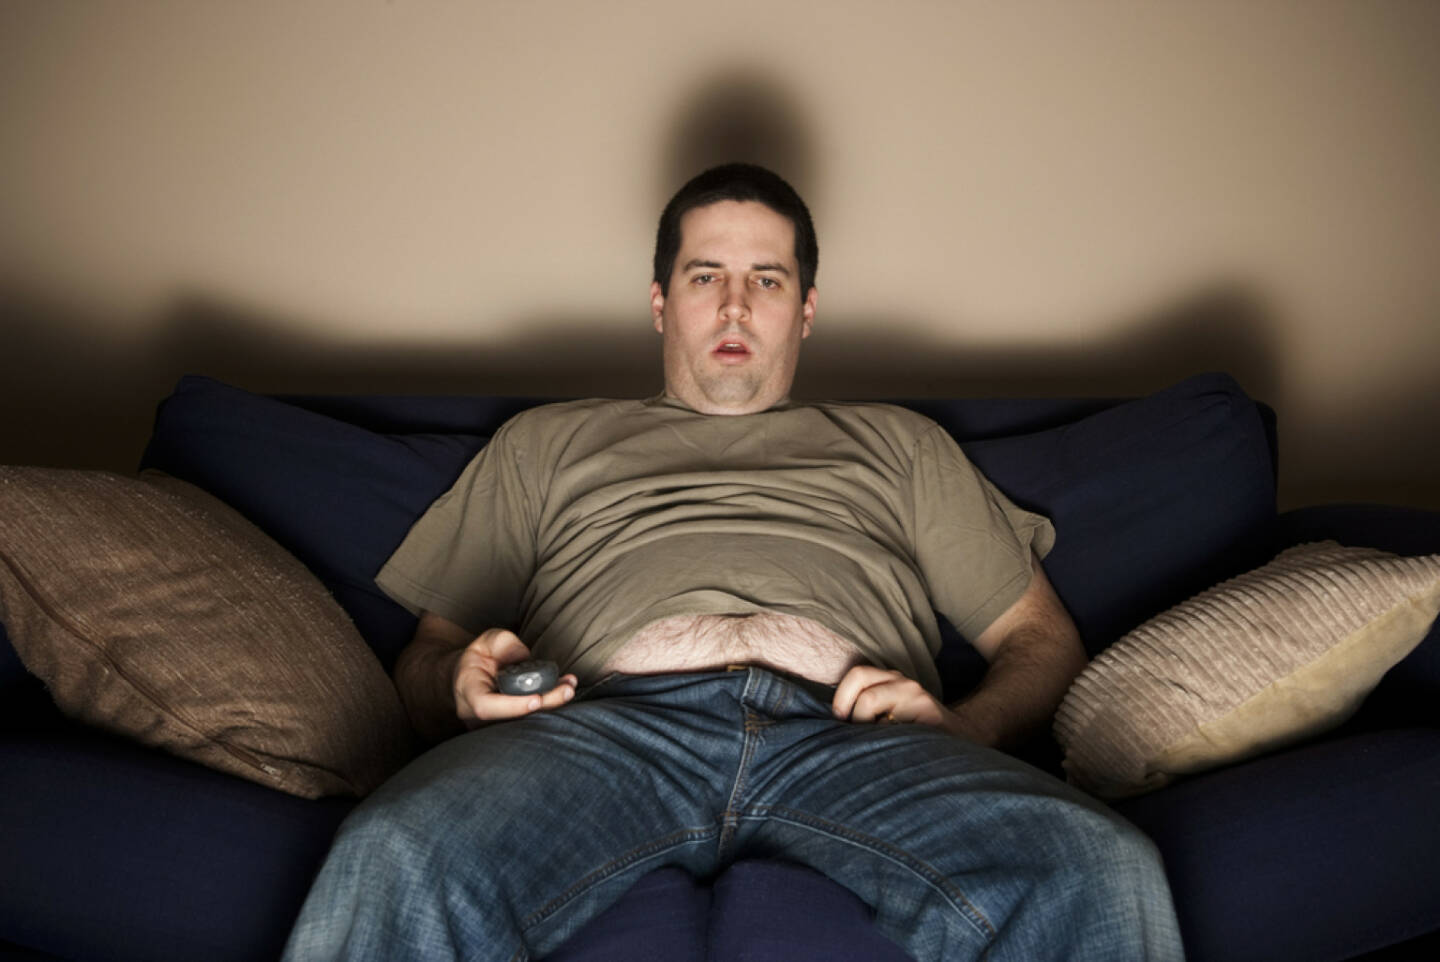 couch potatoe, Sofa, Mann, http://www.shutterstock.com/de/pic-96088505/stock-photo-overweight-slob-watches-tv-with-belly-showing.html